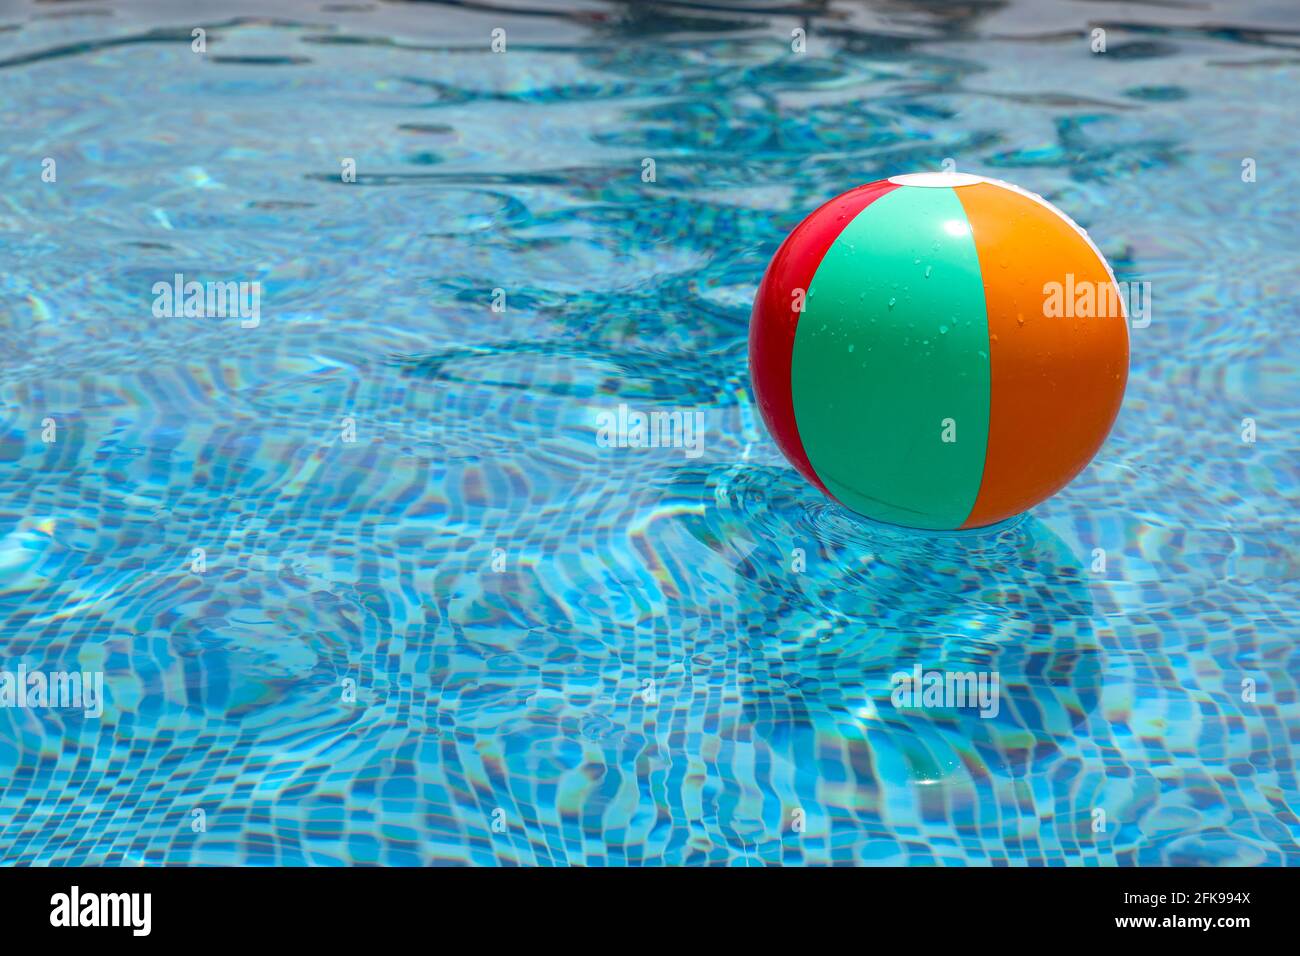 Beach ball in pool. Colorful inflatable ball floating in swimming pool, summer vacation concept. Stock Photo